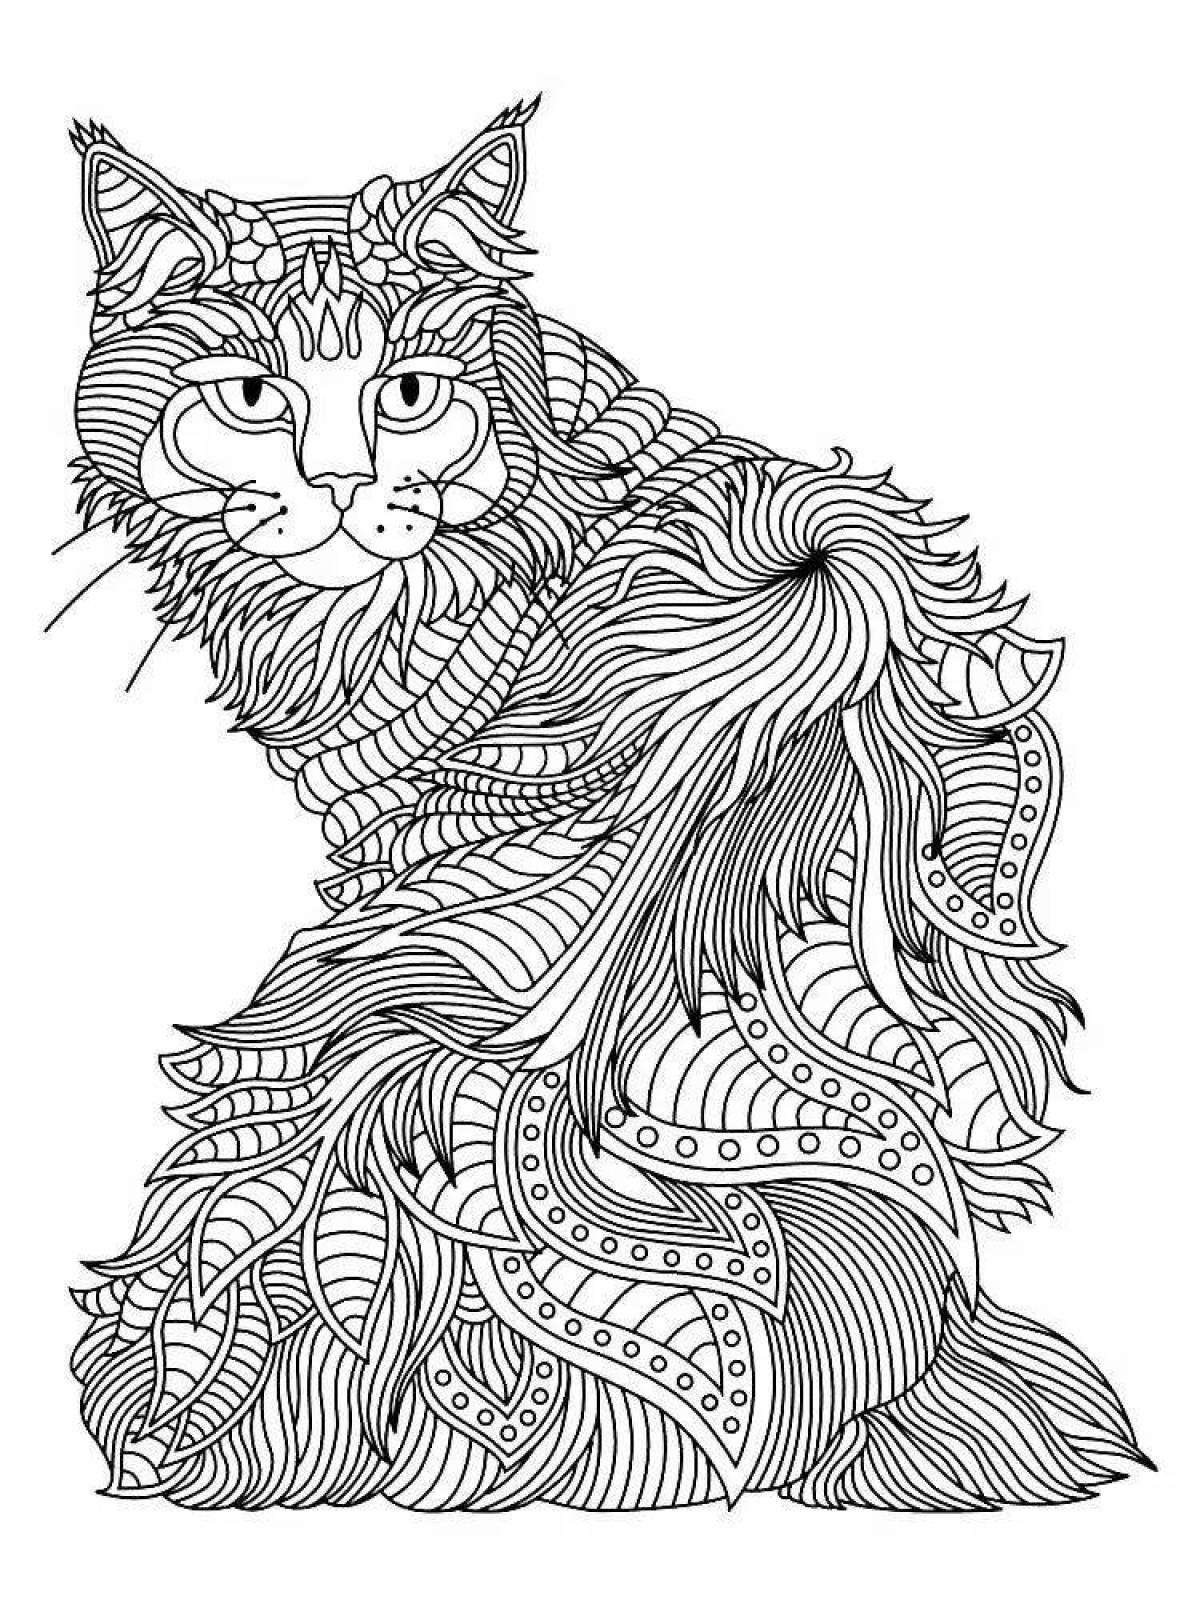 Intriguing coloring complex cats